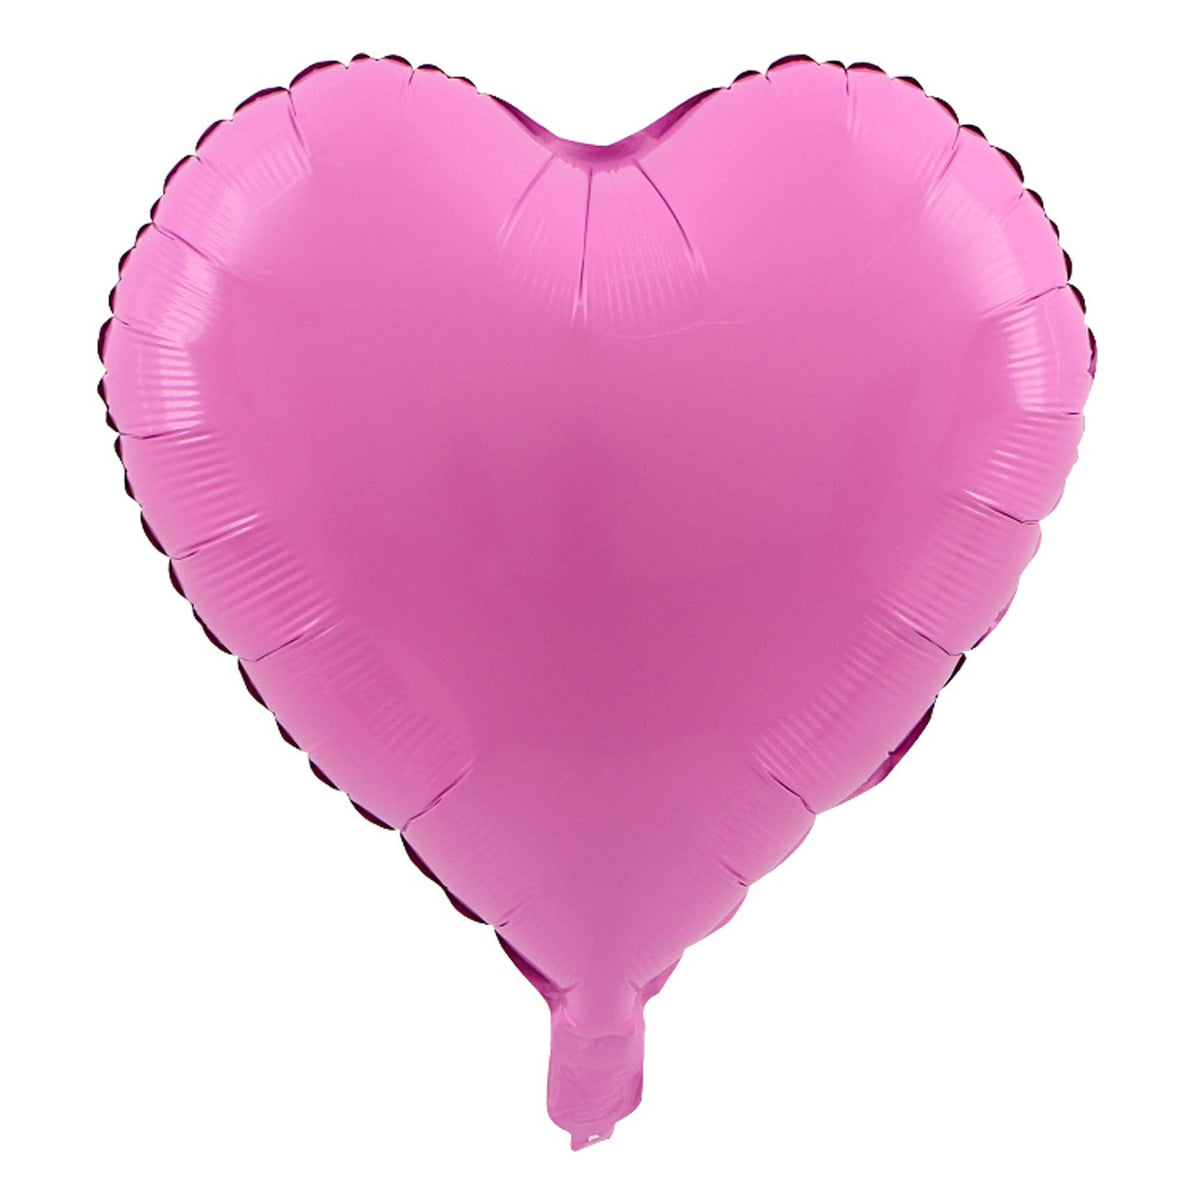 BOOMBA INTERNATIONAL TRADING CO,. LTD Balloons Matte Pink Heart Shaped Foil Balloon, 18 Inches, 1 Count